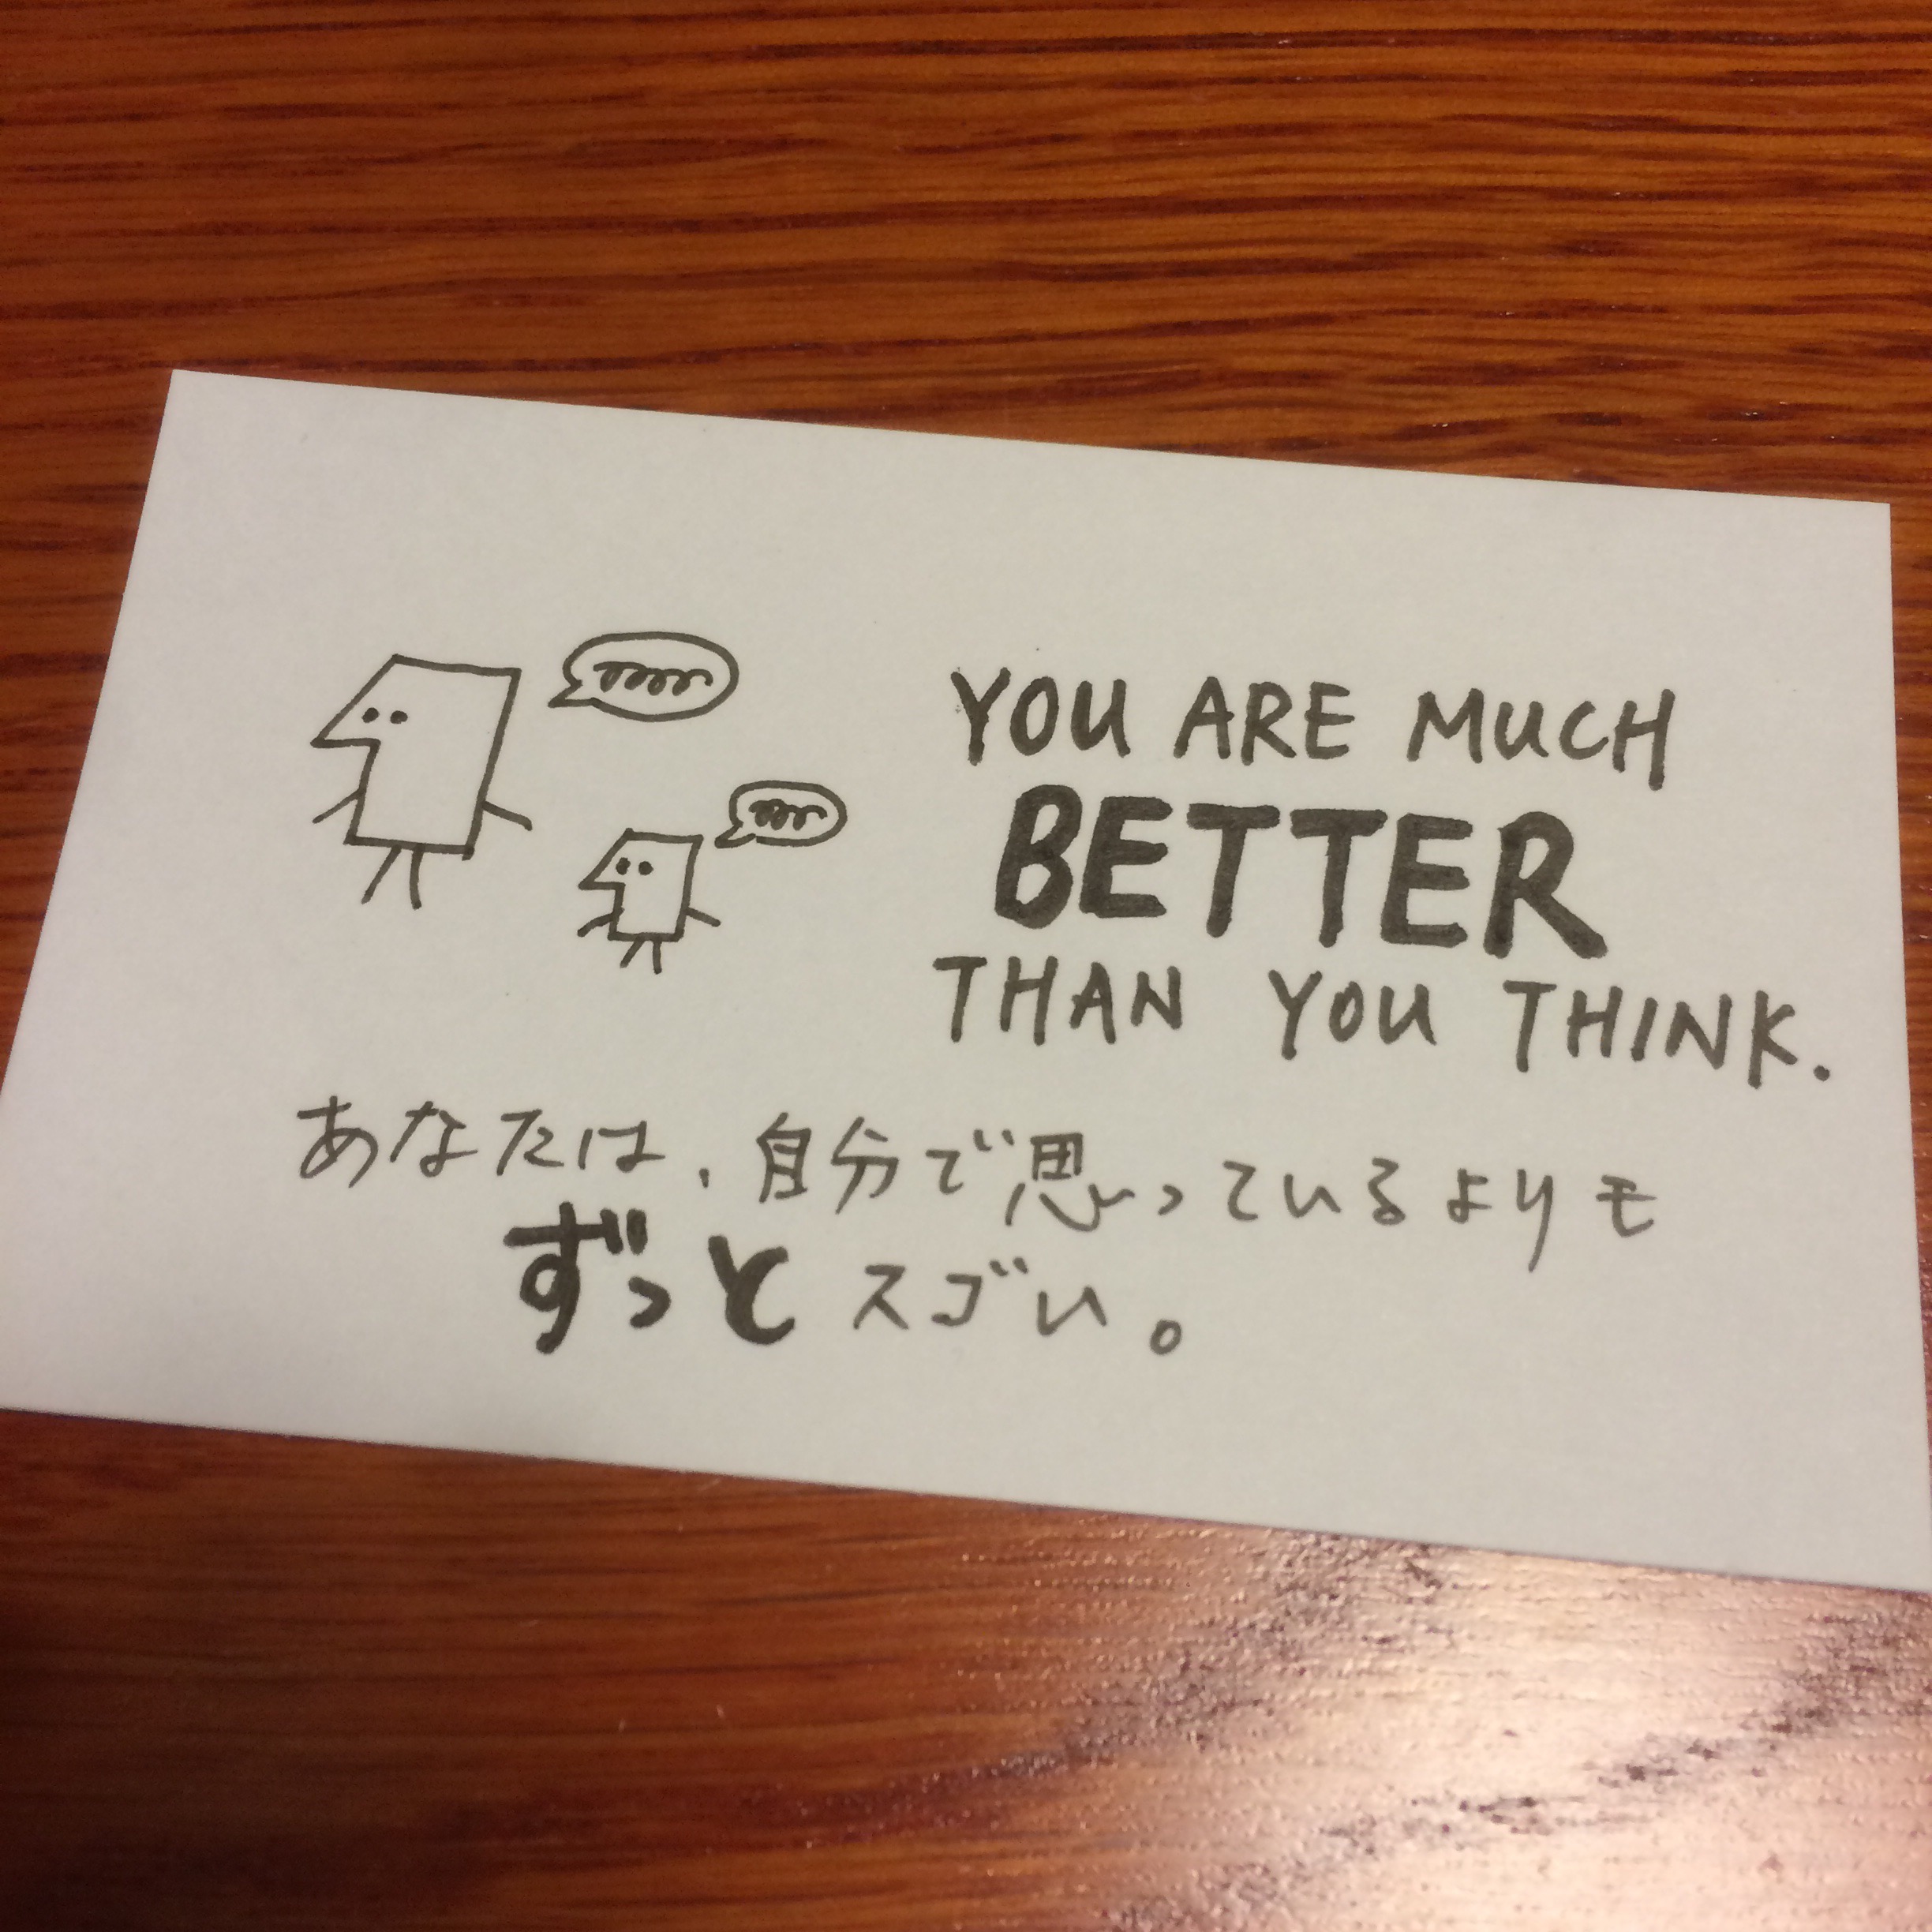 You are much better than you think.